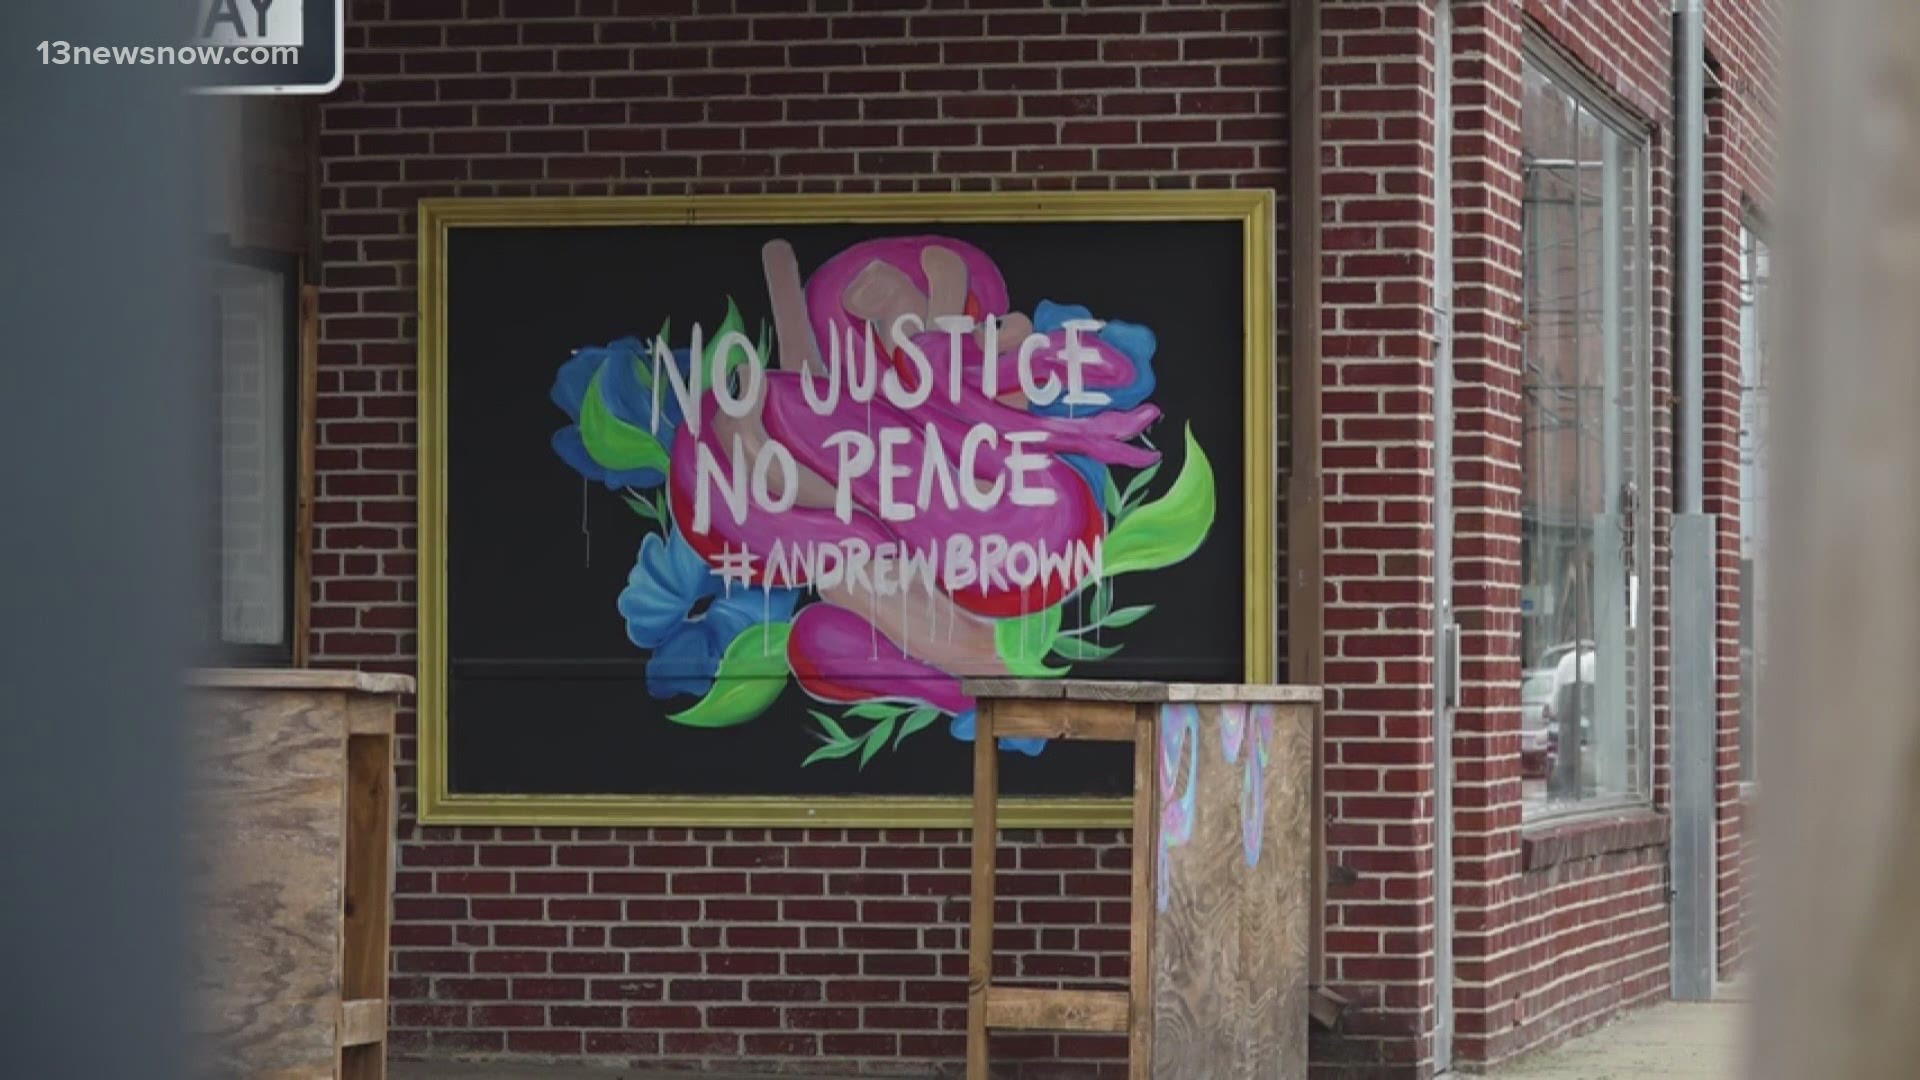 Elizabeth City will soon memorialize the fight for justice in the case of Andrew Brown Jr.